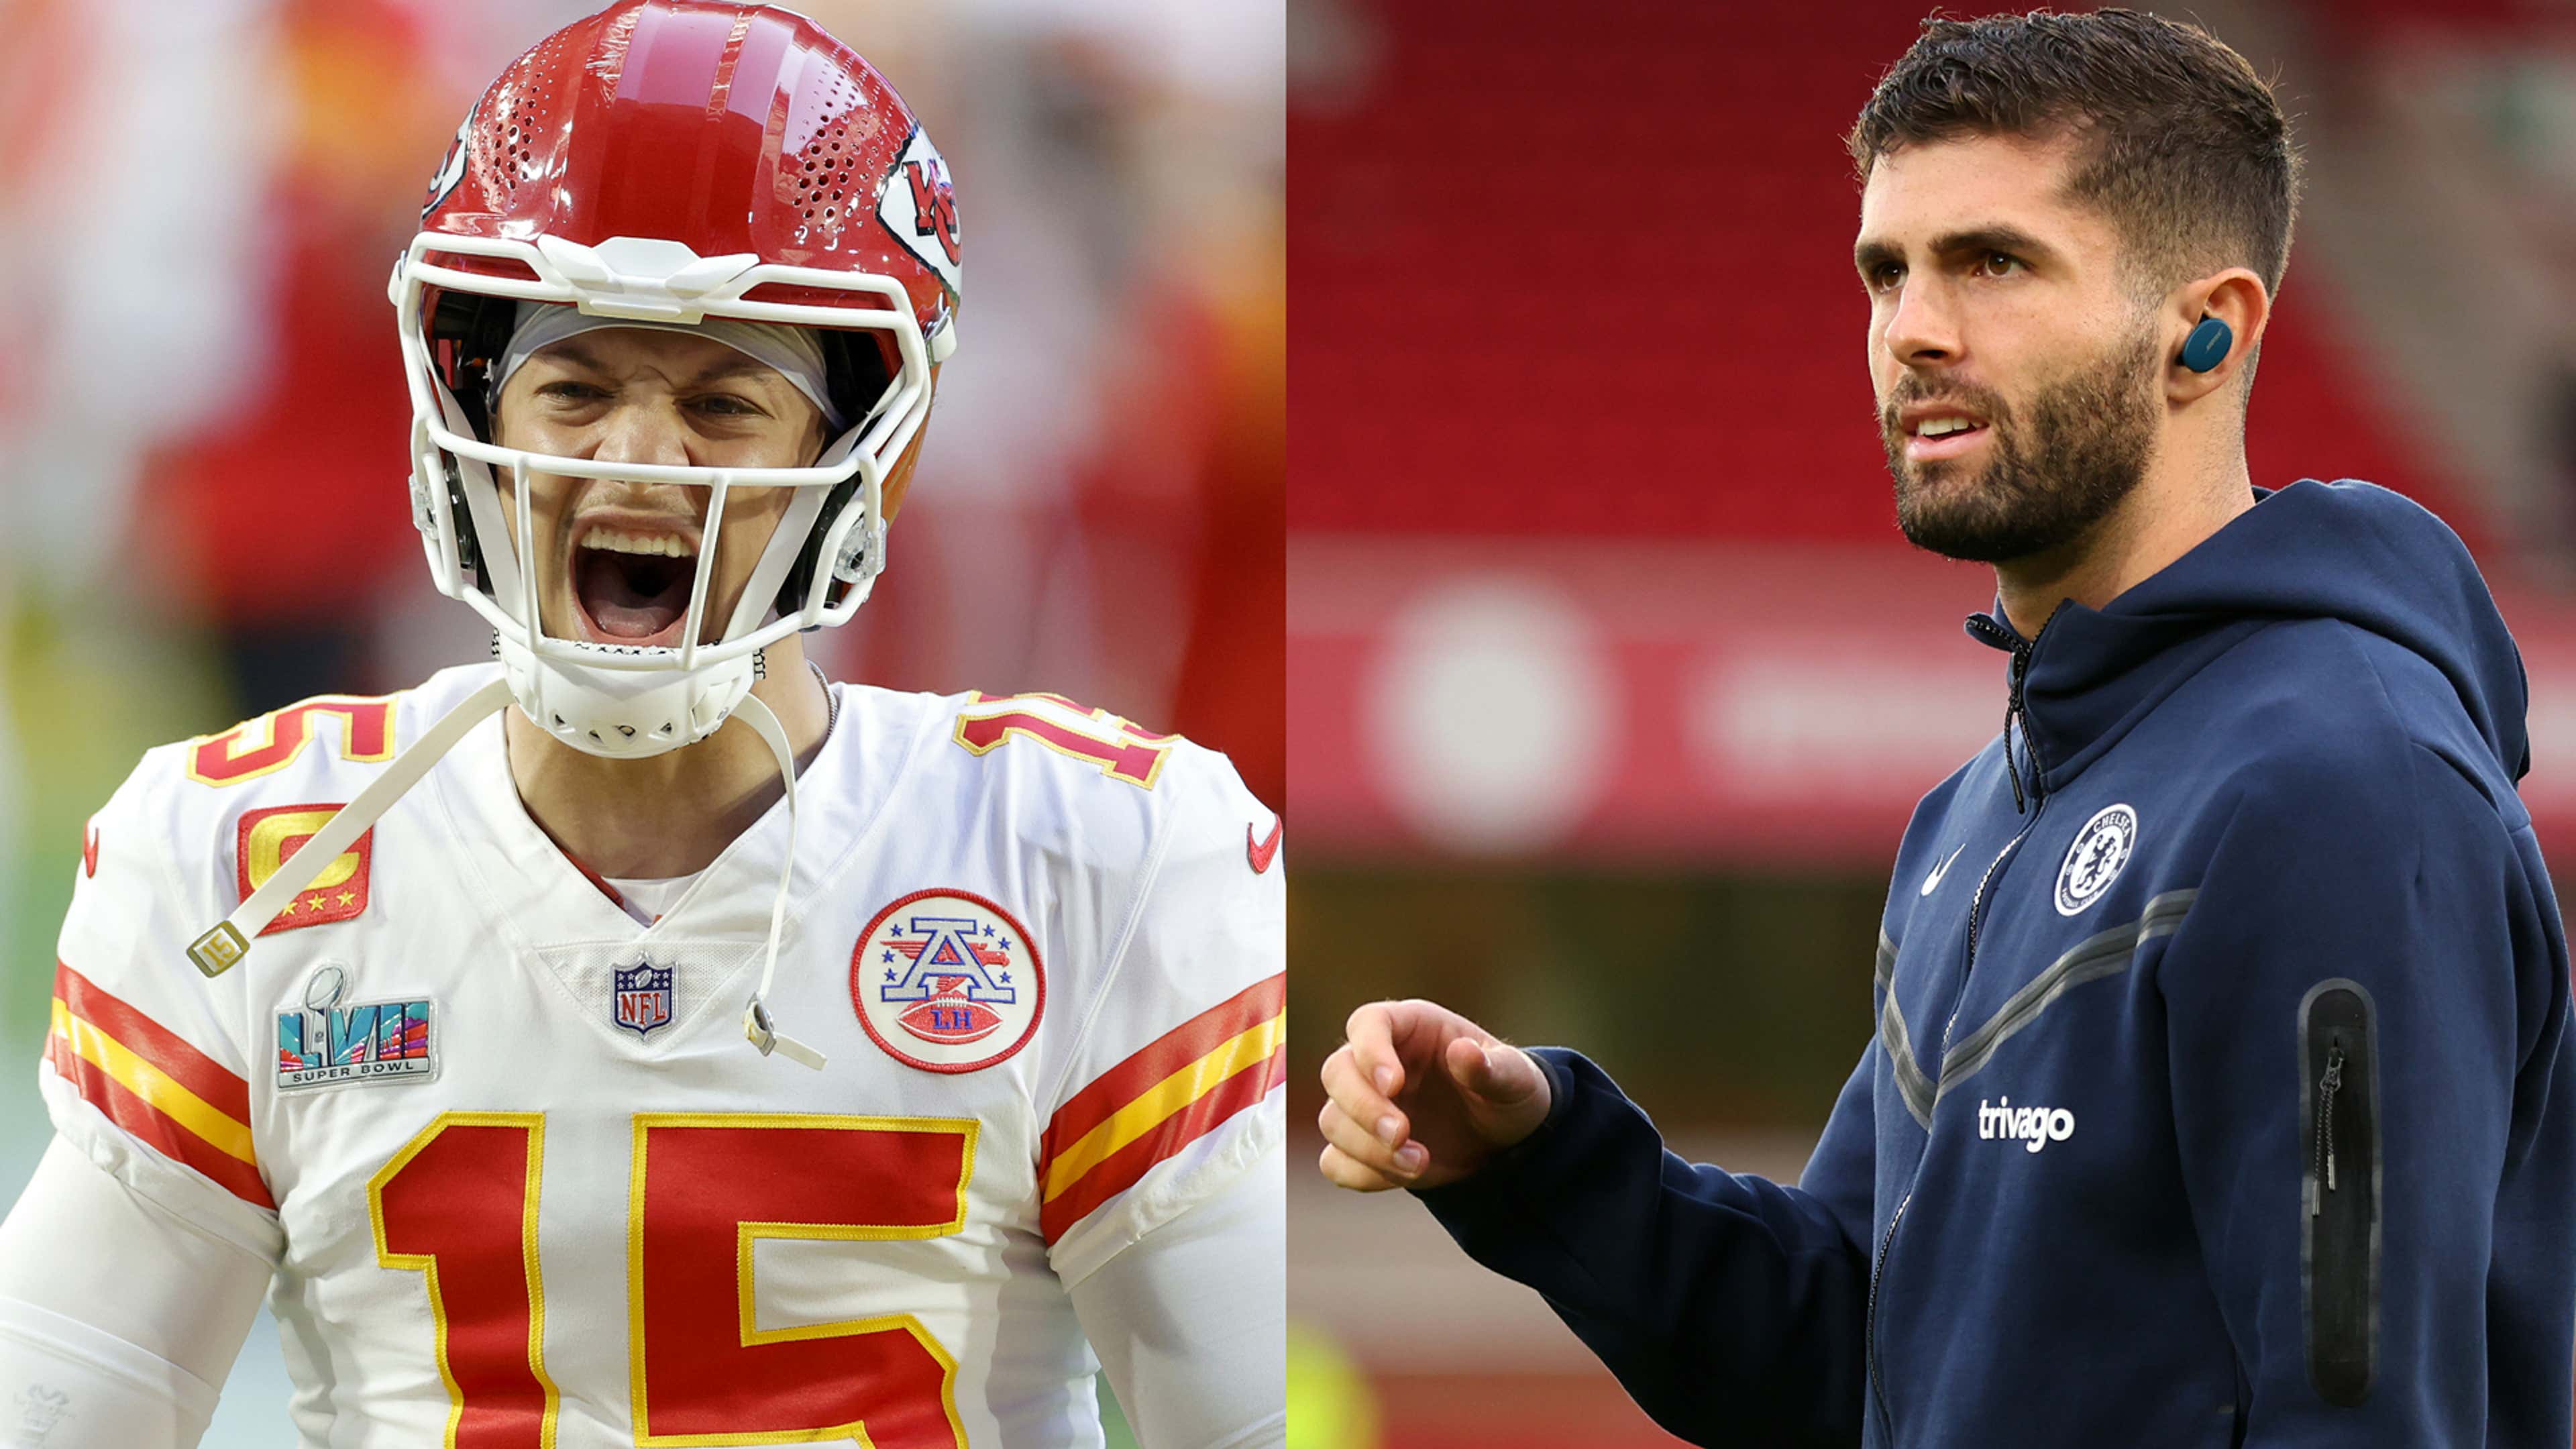 USMNT forward Christian Pulisic forced to wear Patrick Mahomes jersey after  Chiefs' Super Bowl win, reveals Chelsea team-mate Reece James